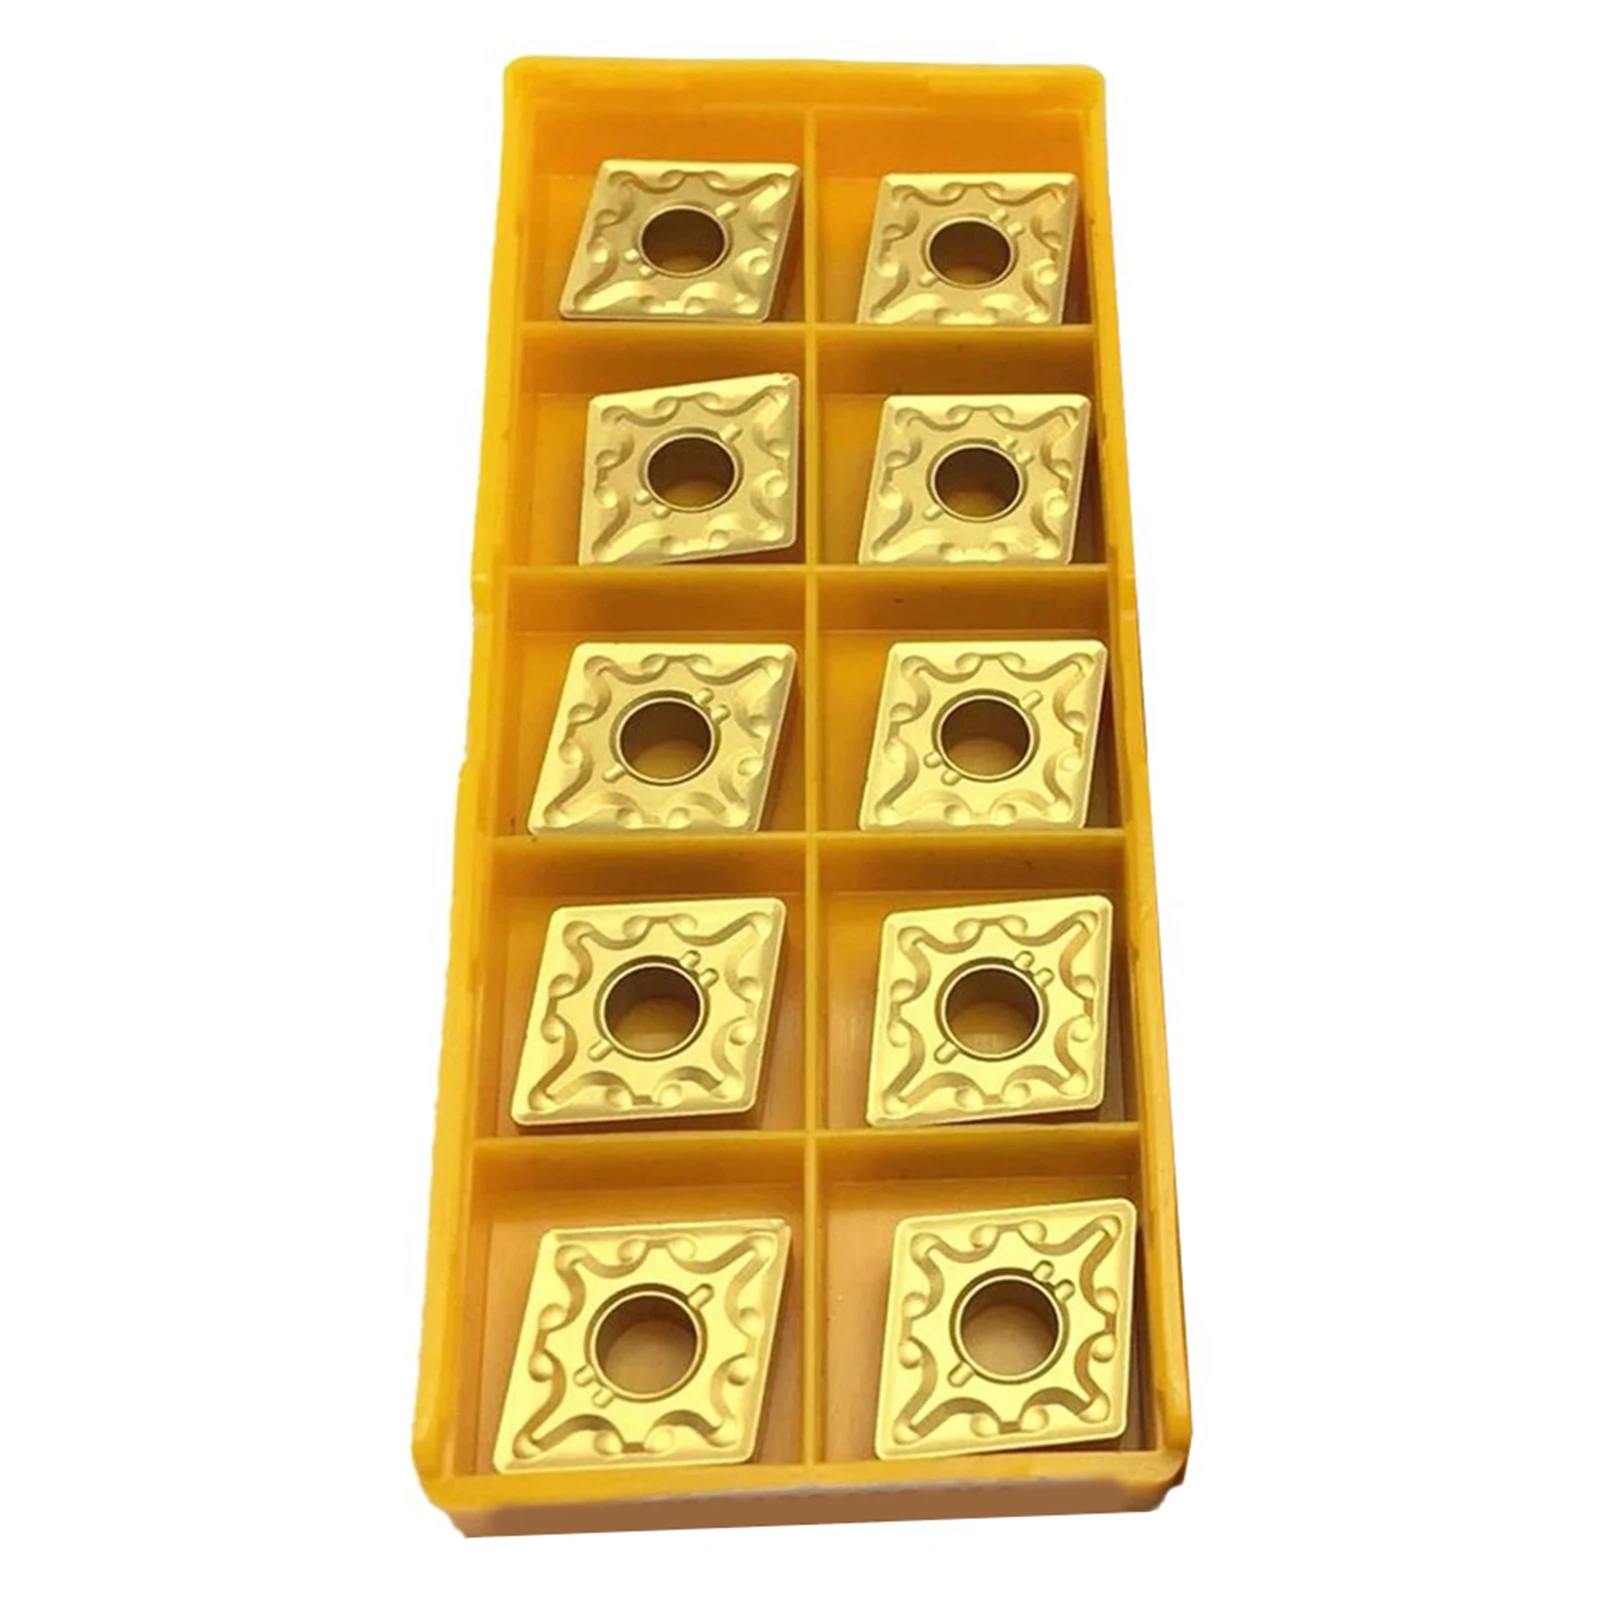 

10pcs CNMG120404-MA UE6020 Turning Insert Kit For CNC Lathe Alloy Steel Cemented Carbide Blade Toolholding Tool Accessories